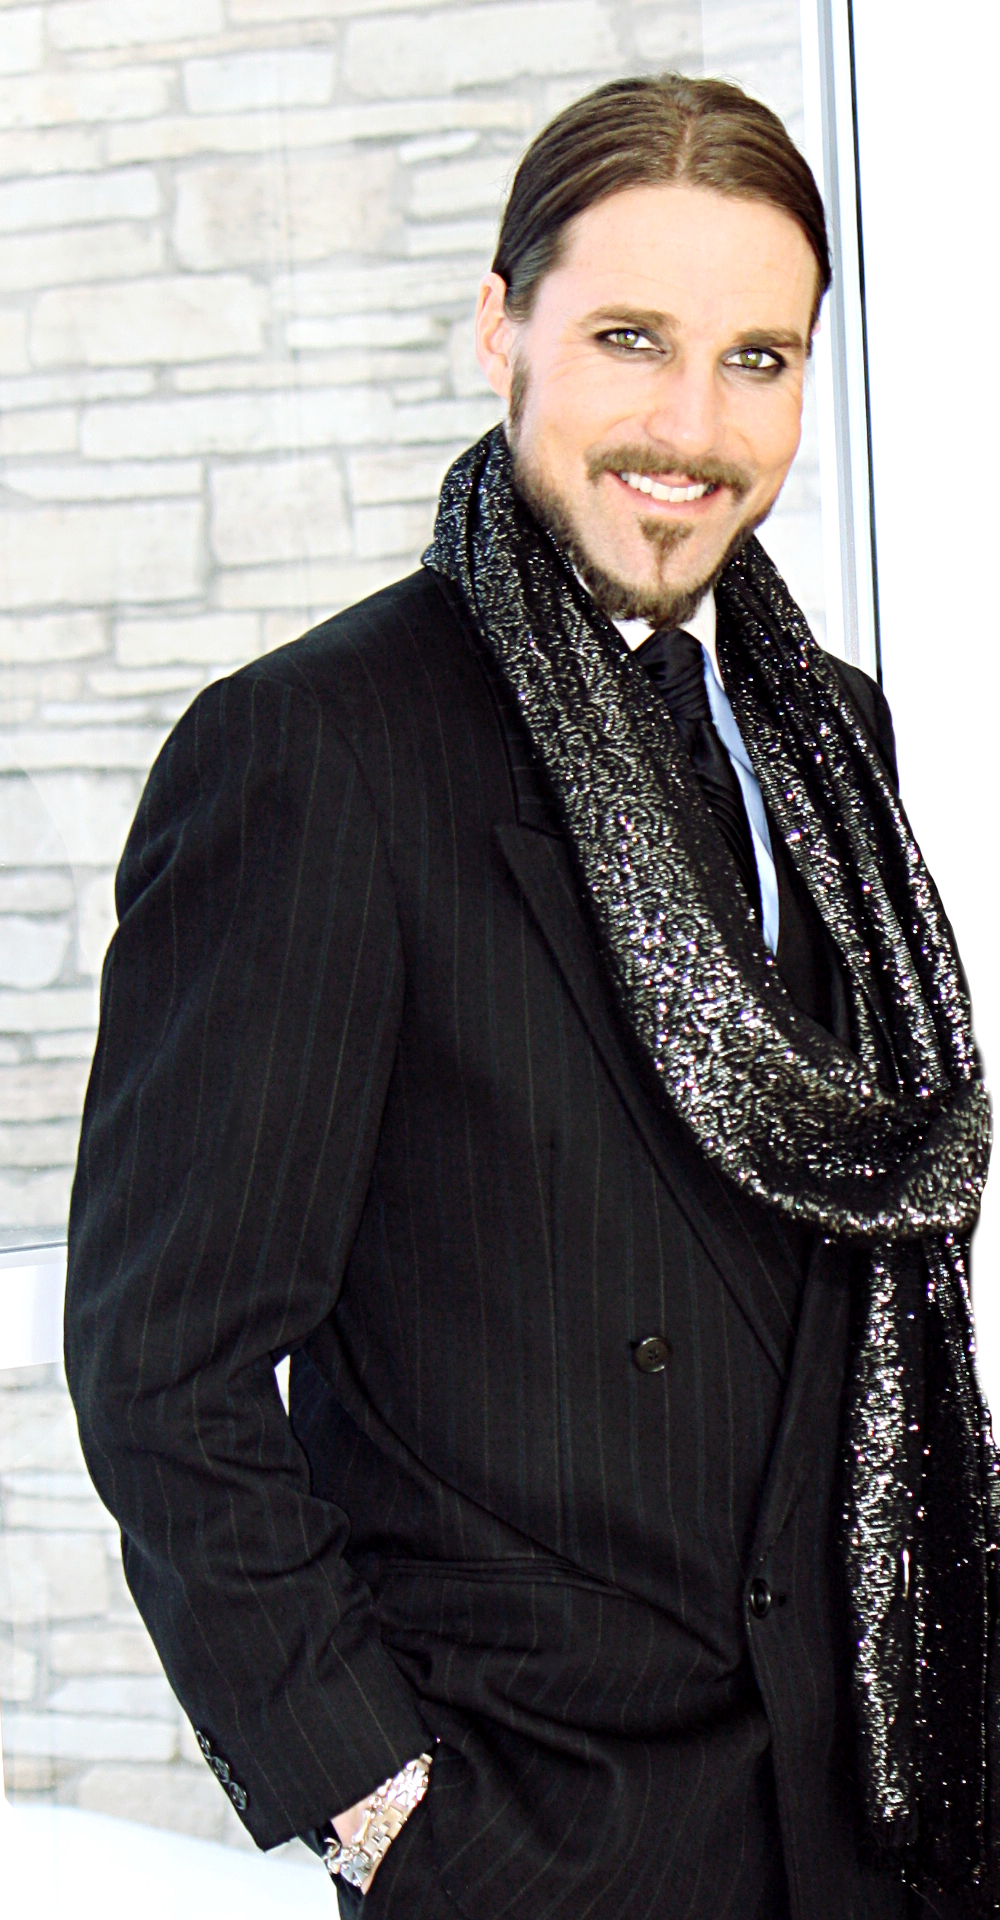 Matt Wiggins during a photo shoot as he prepares to host the 23rd Annual Iowa Motion Picture Awards in March 2014.